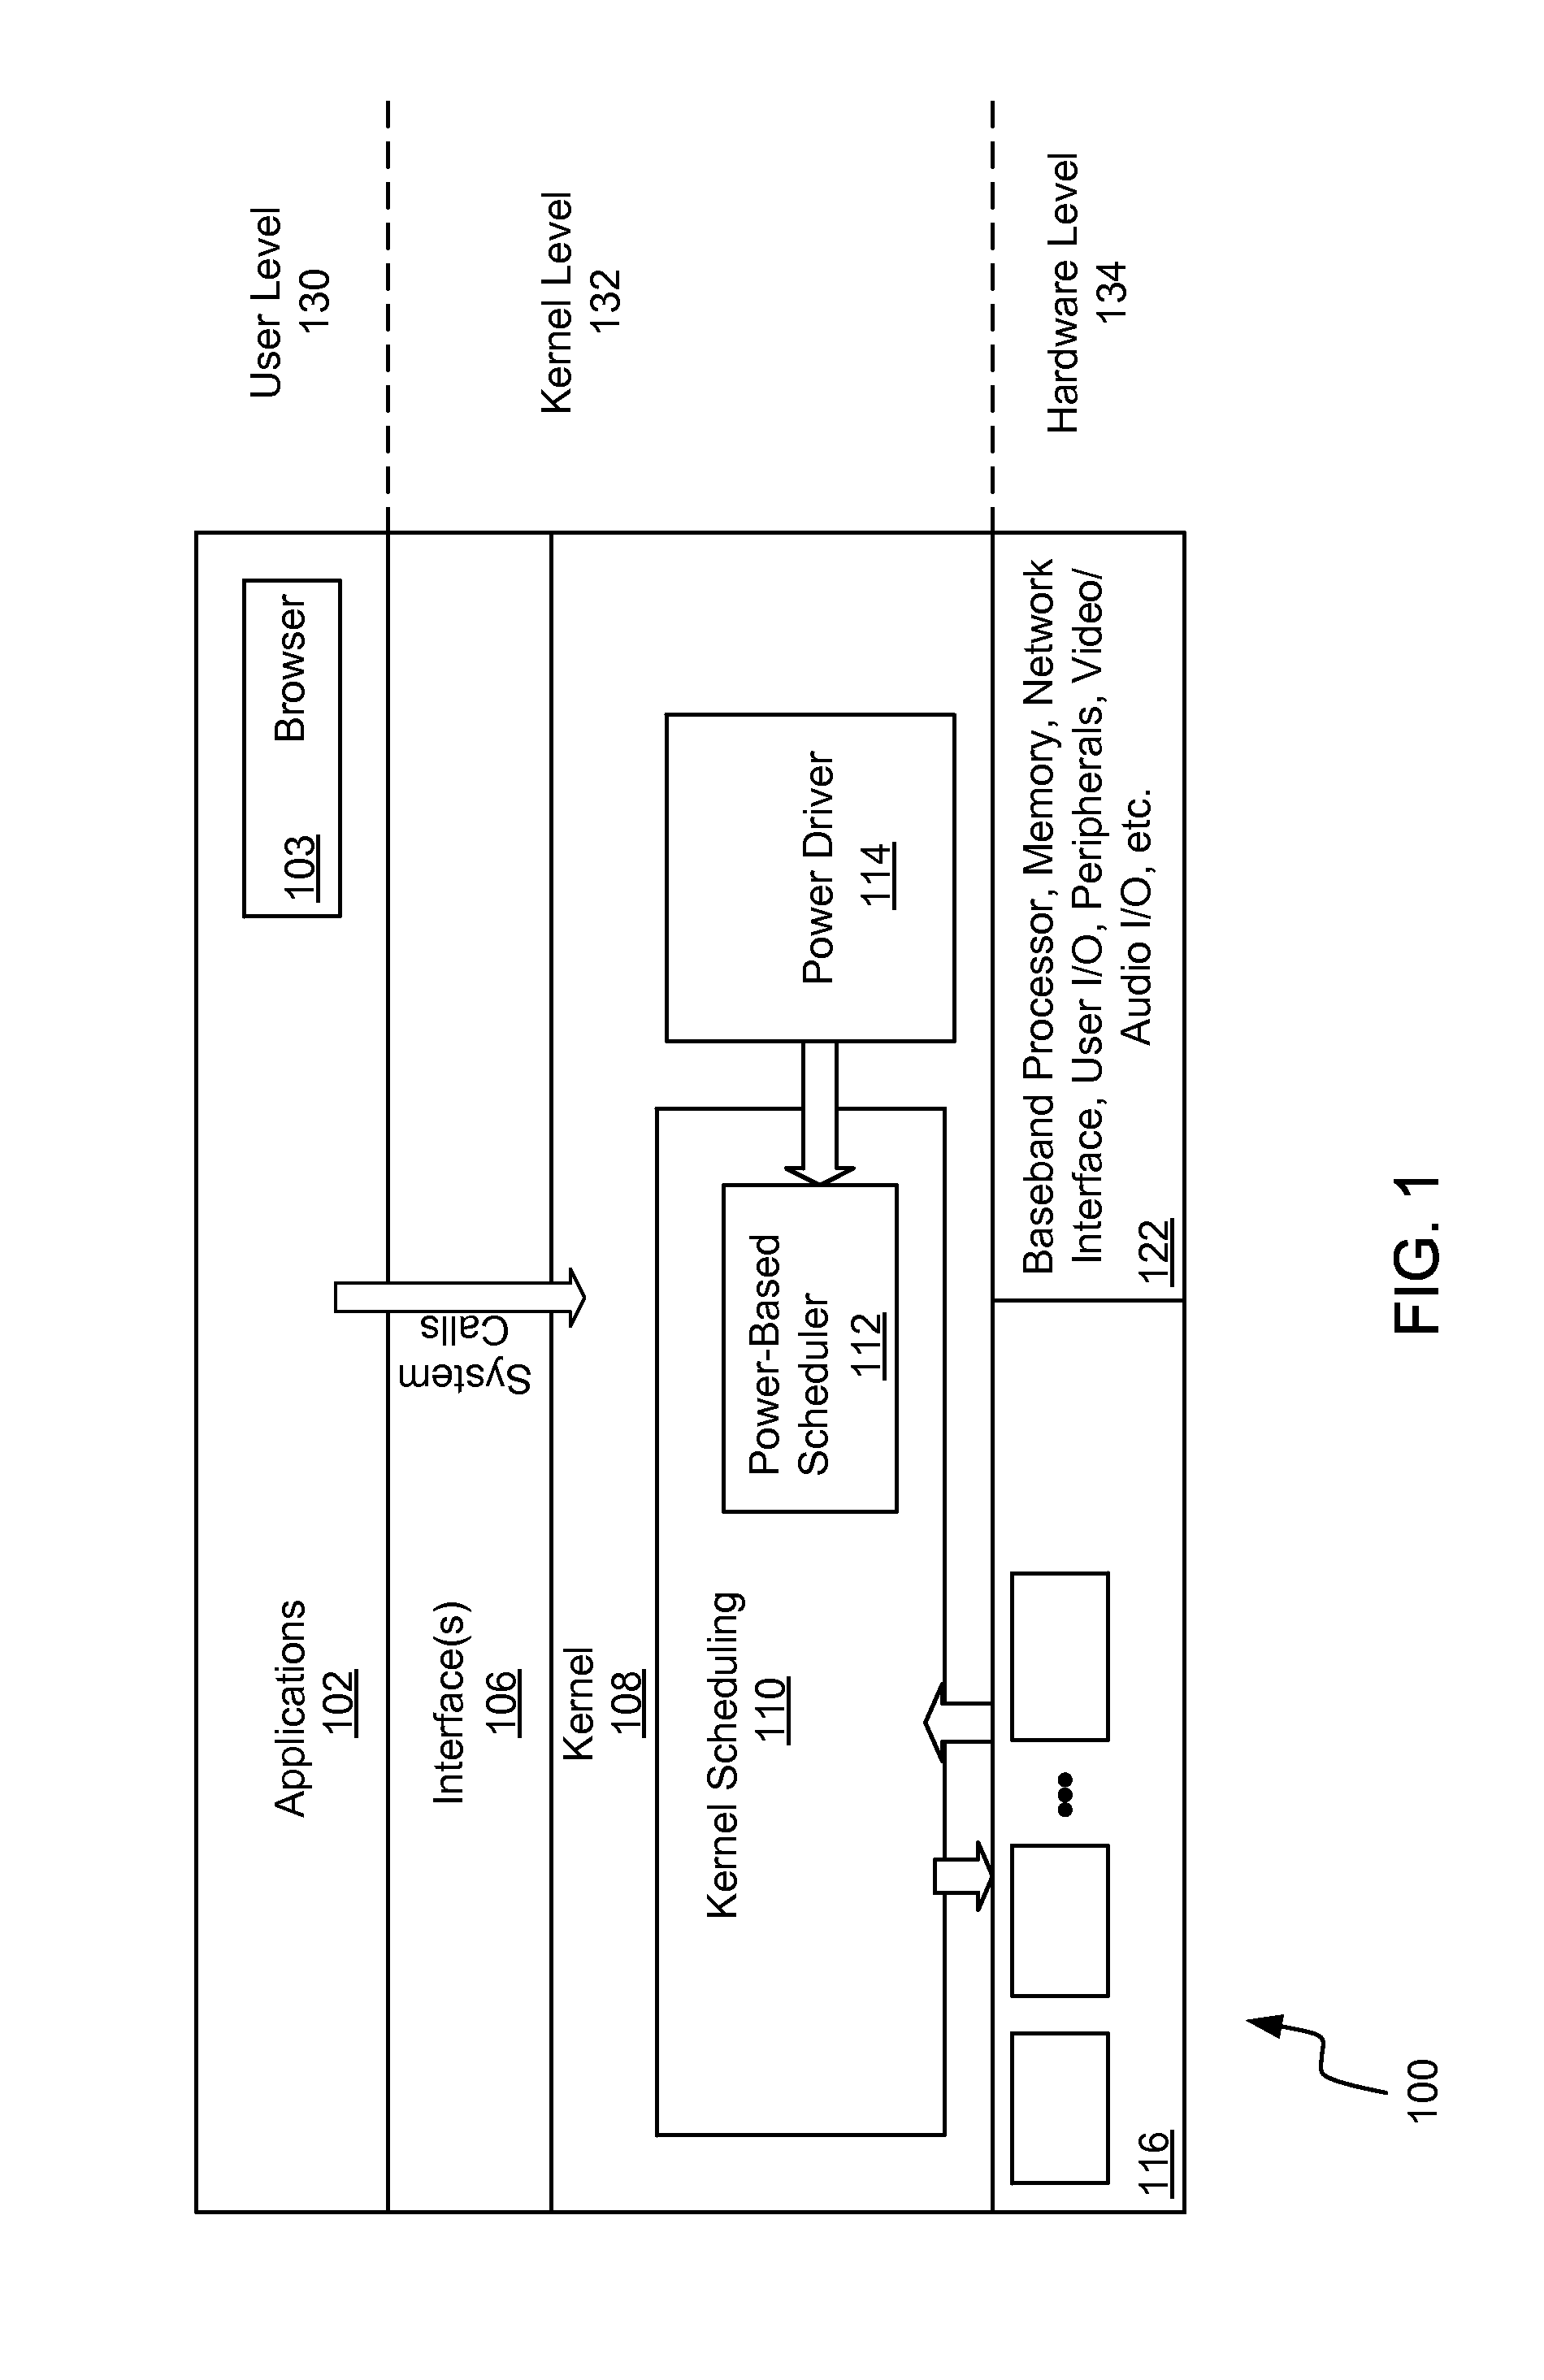 Power aware task scheduling on multi-processor systems